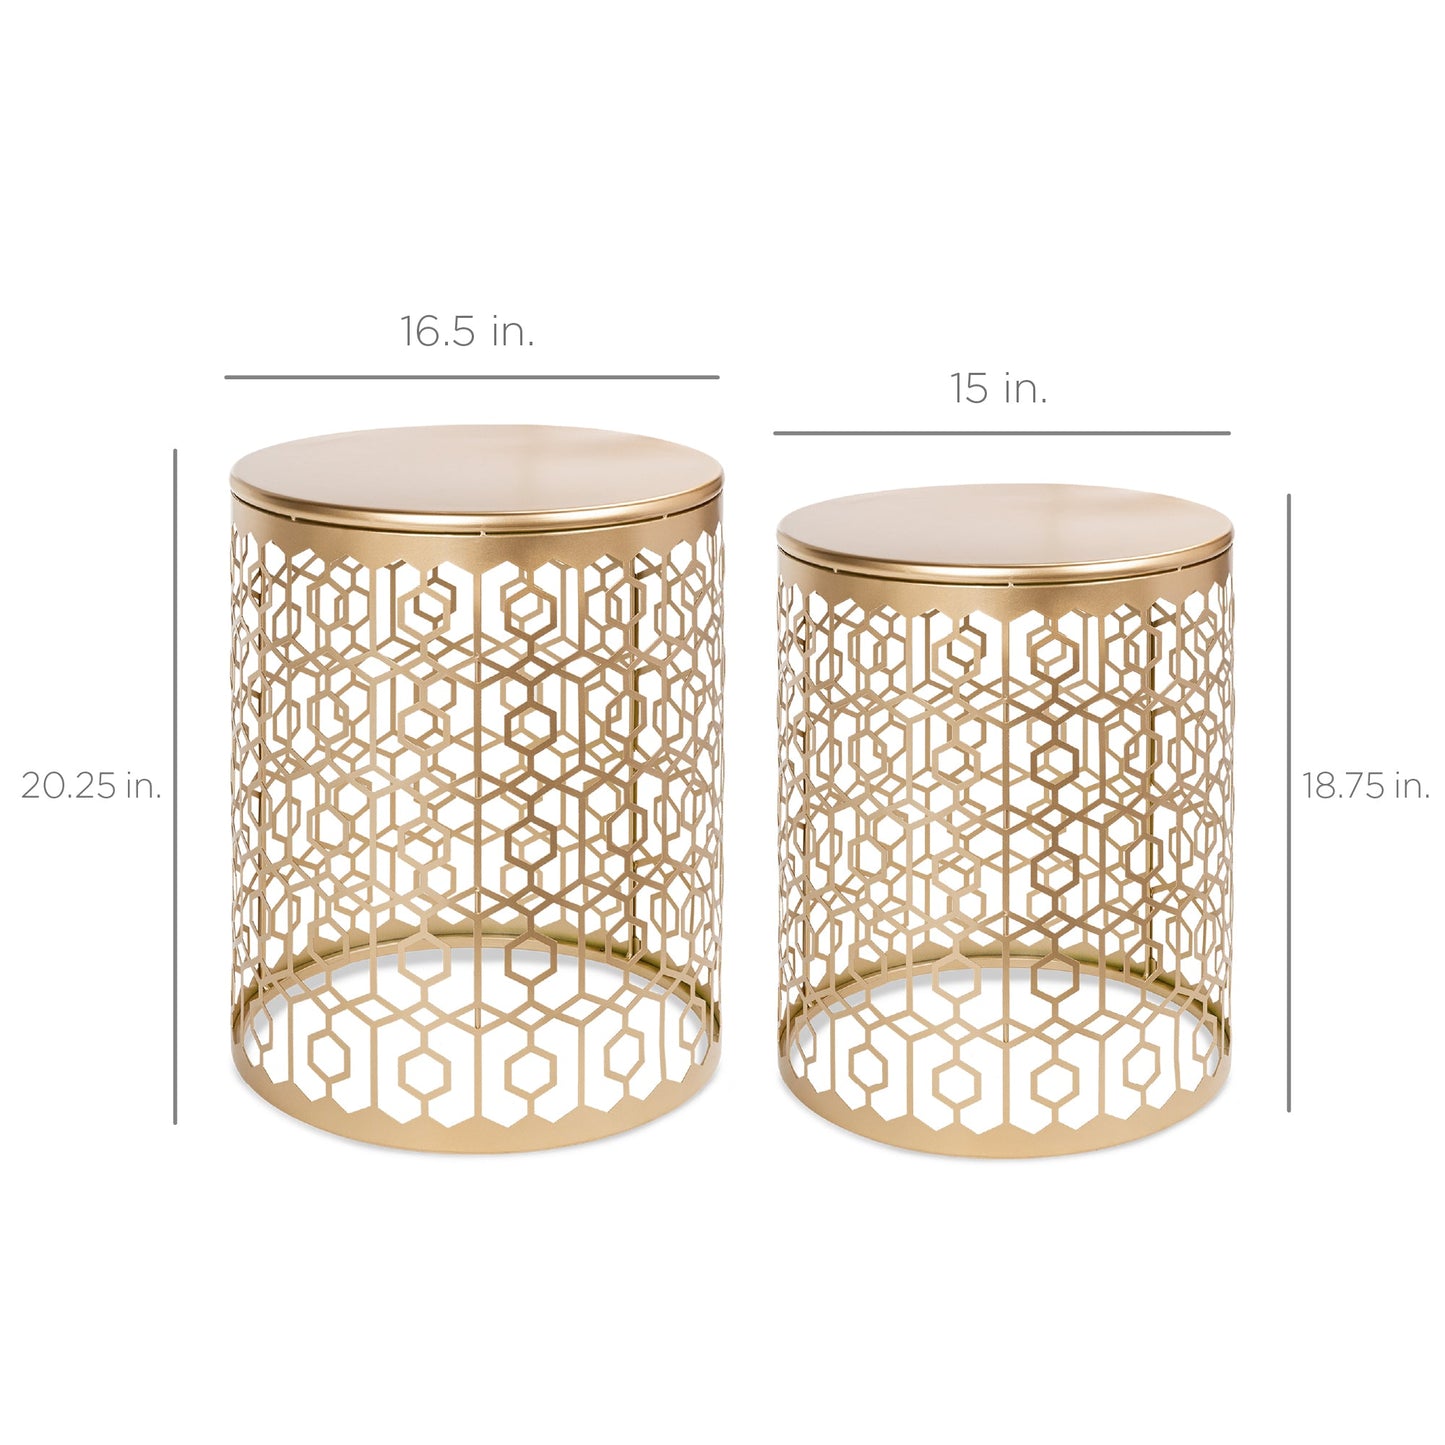 Set of 2 Decorative Round Side Accent Table Nightstands w/ Nesting Design